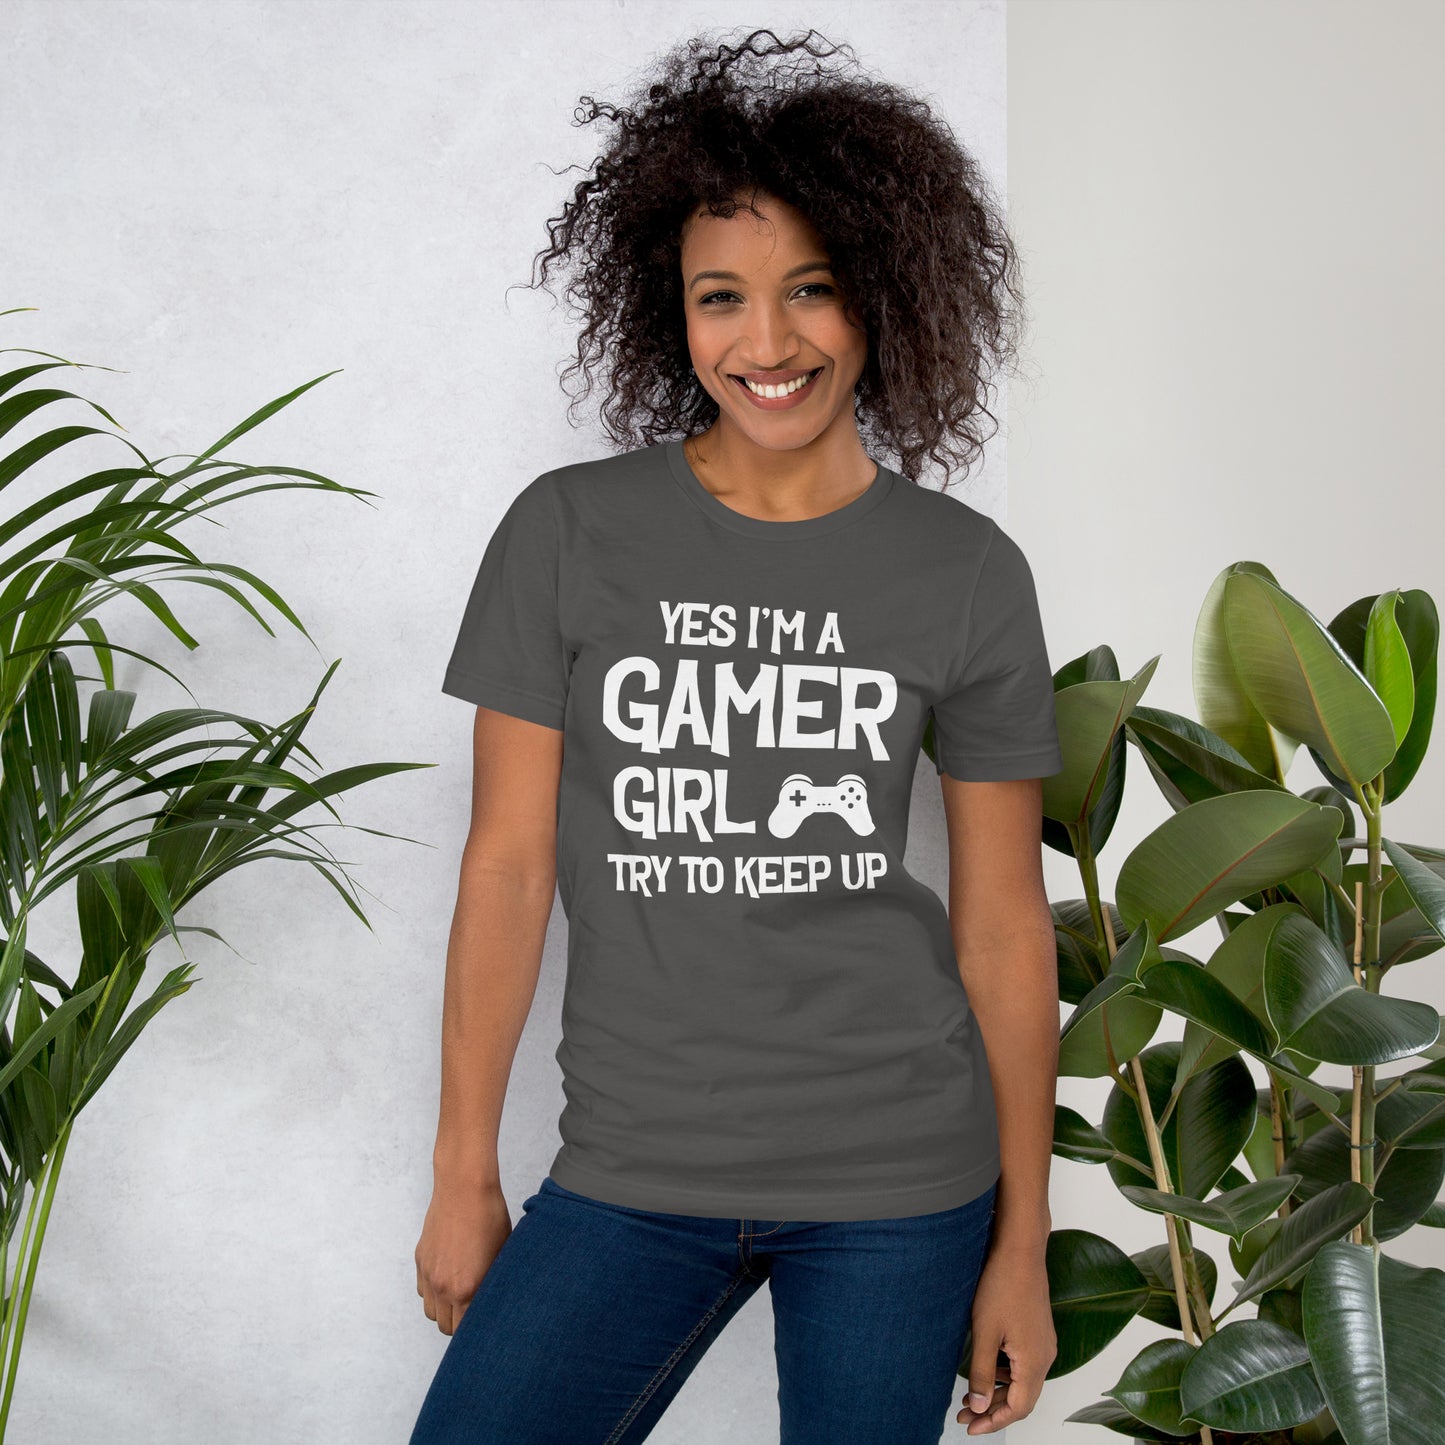 Yes I'm a Gamer Girl, Try to Keep Up | Women's Casual Tee | Gamer Girl Shirt